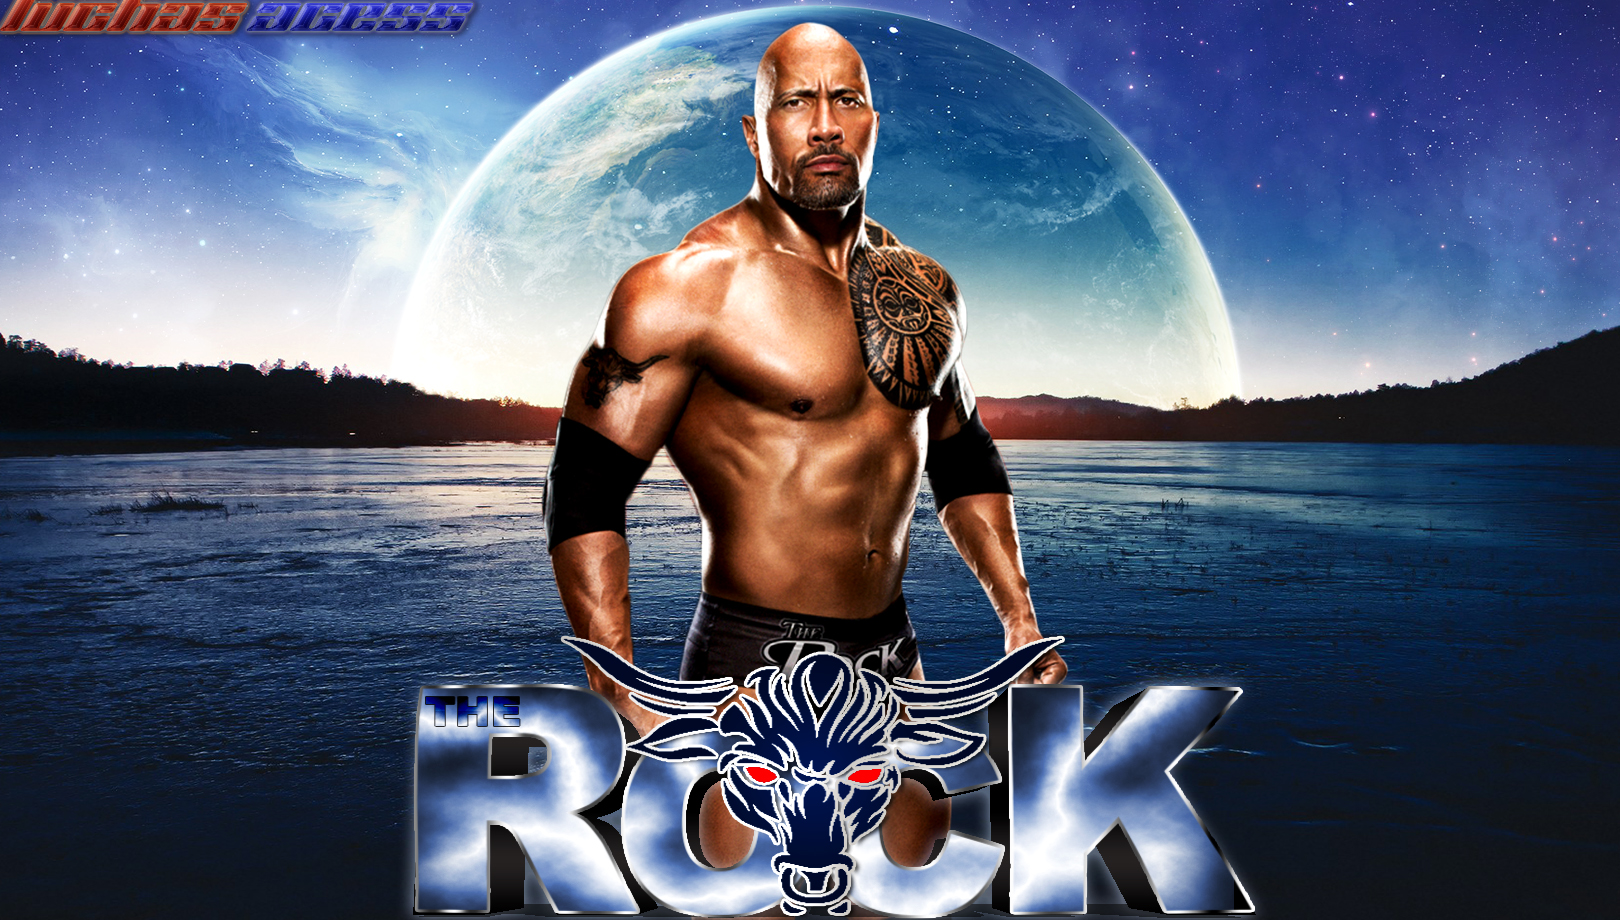 rePin image: The Rock 2013 Wallpapers Hd on Pinterest